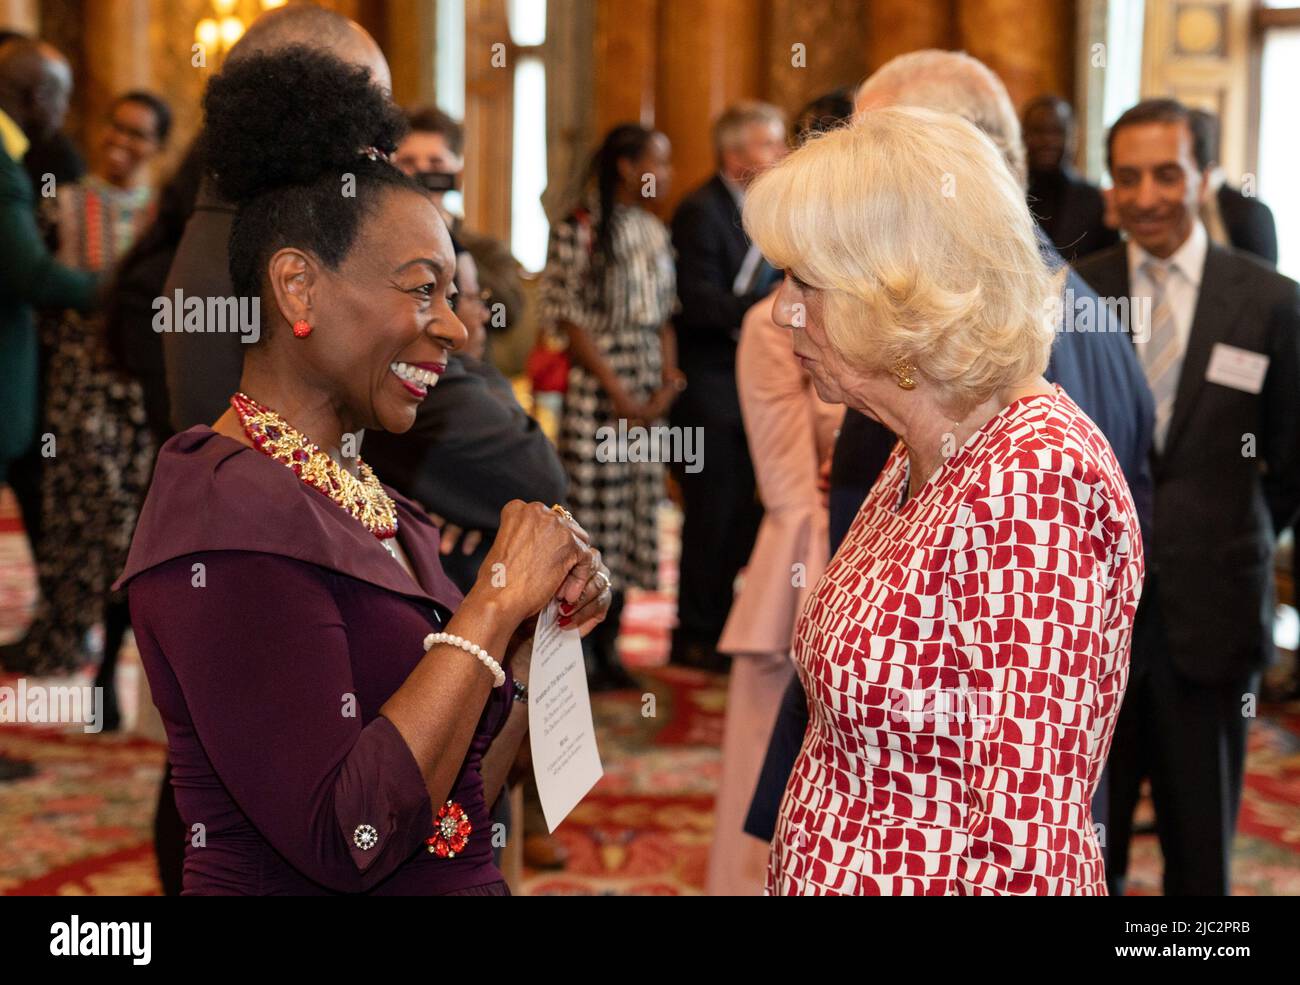 Britain's Camilla, Duchess of Cornwall, speaks with actress, author and politician Floella Benjamin, while she attends a reception celebrating the Commonwealth Diaspora of the United Kingdom, in London, Britain, June 9, 2022. Dominic Lipinski/PA Wire/Pool via REUTERS Stock Photo